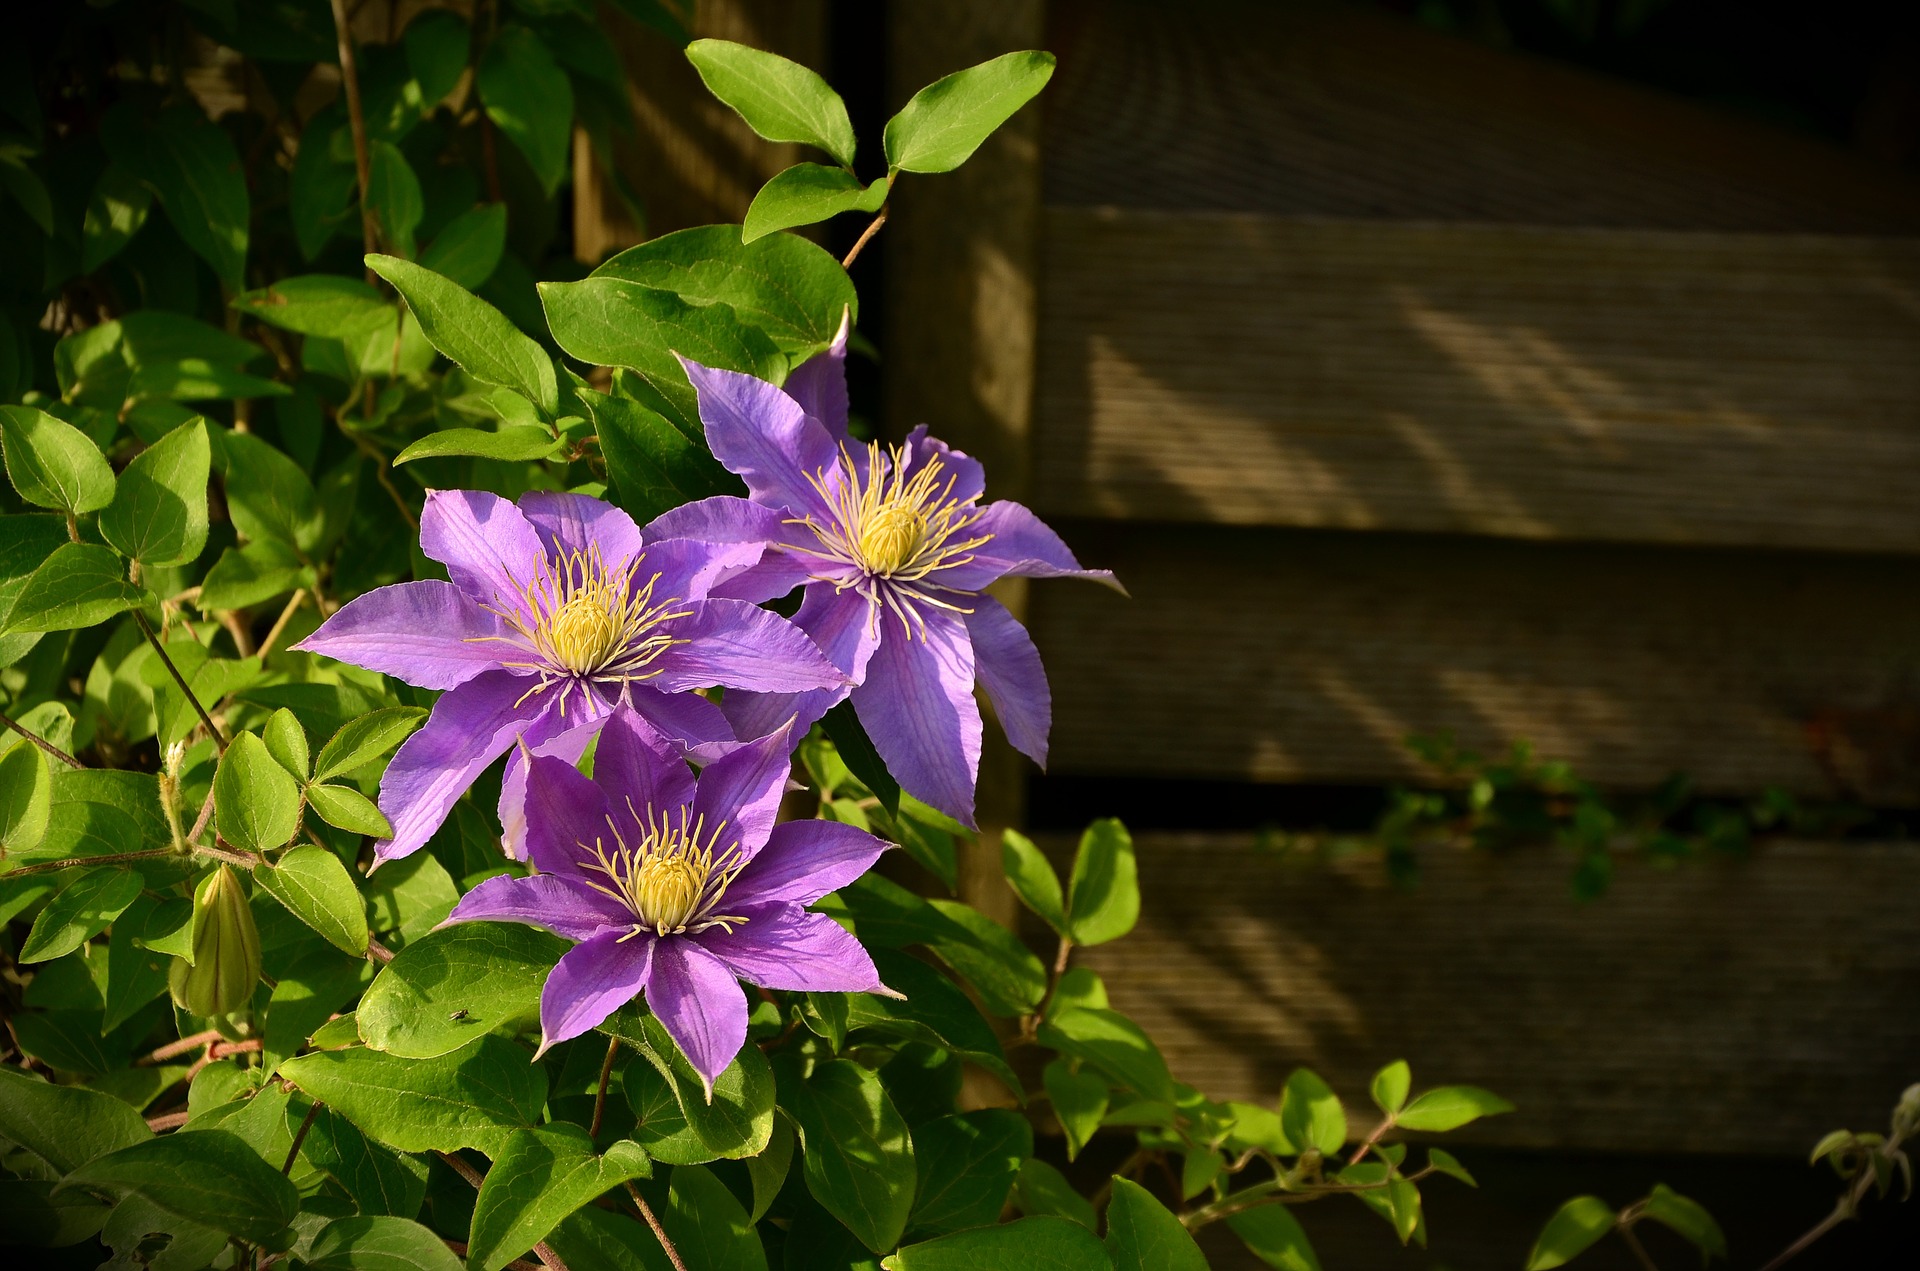 These beautiful clematis flowers climbing a trellis demonstrate one of our DIY landscaping ideas.